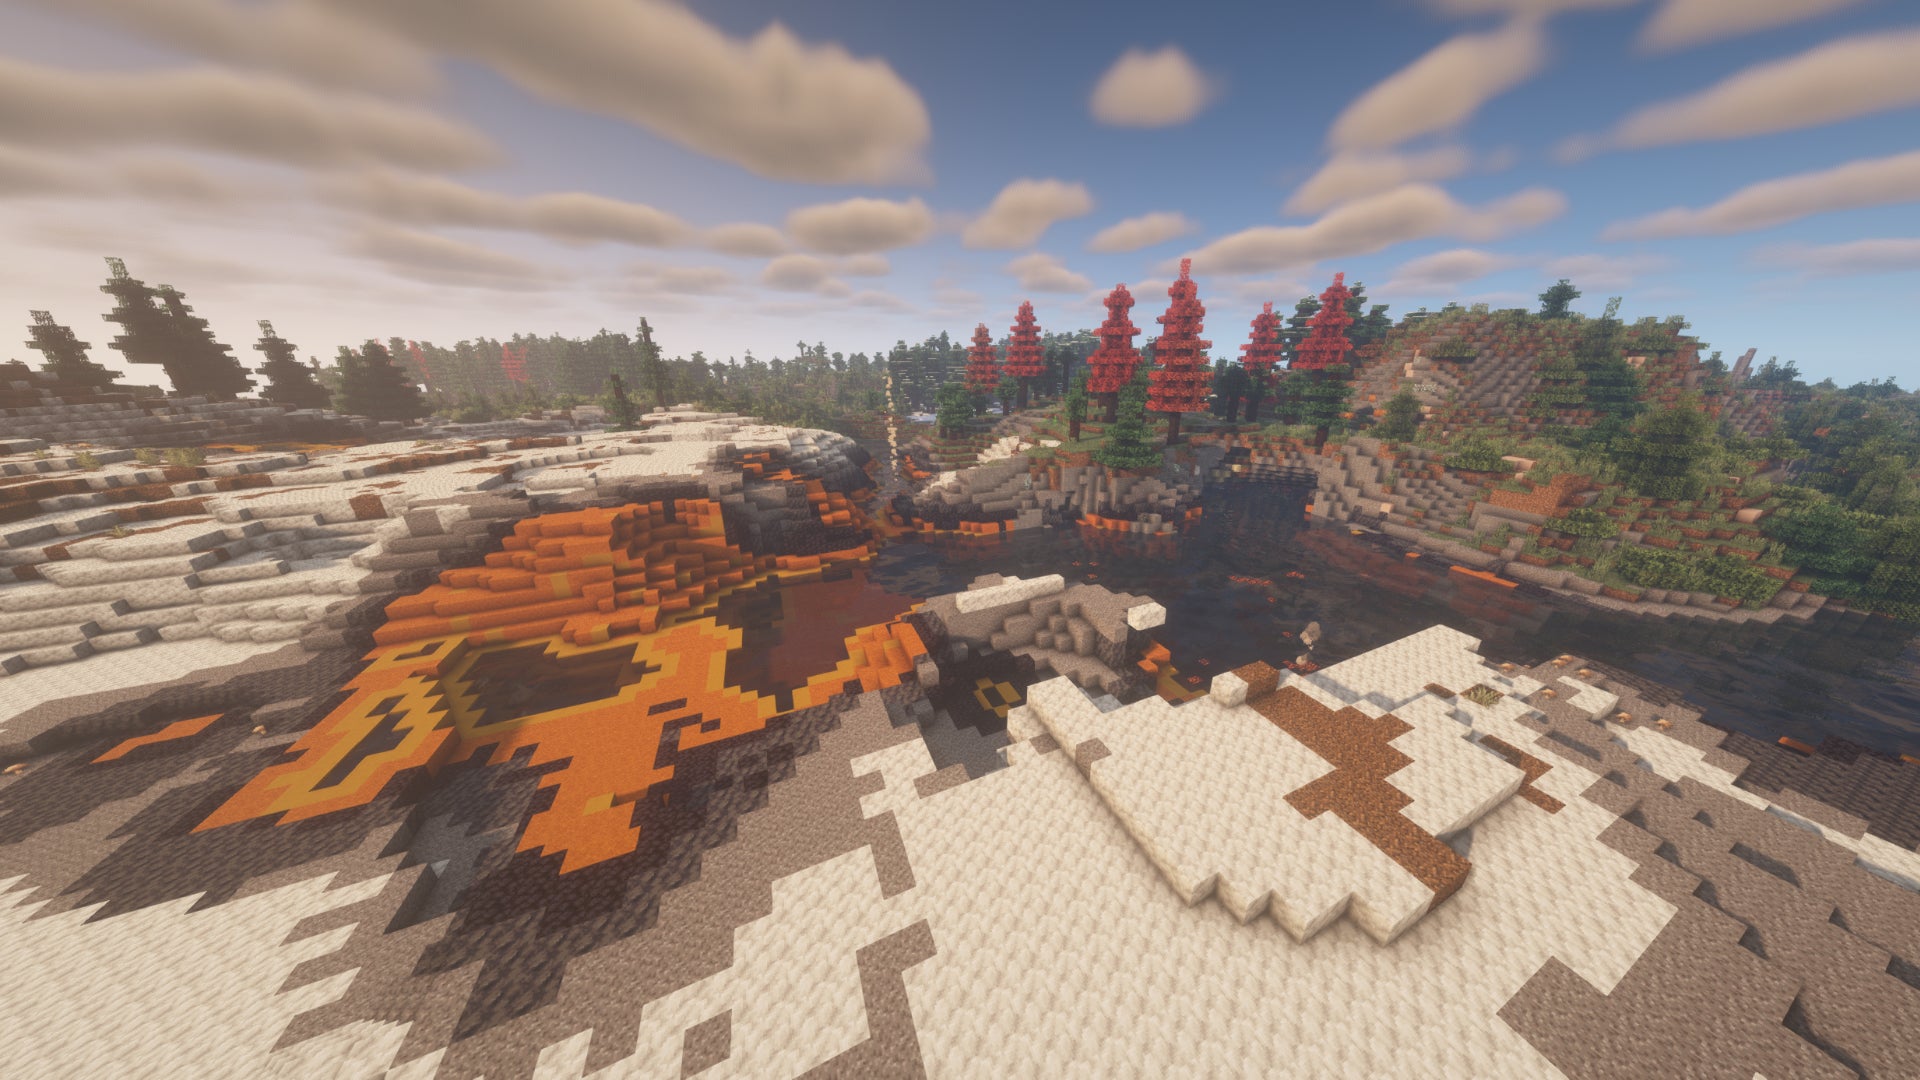 The player in Minecraft looks out at a landscape of Yellowstone, red-leaved trees, and forest - all features of the Terralith terrain-changing mod.